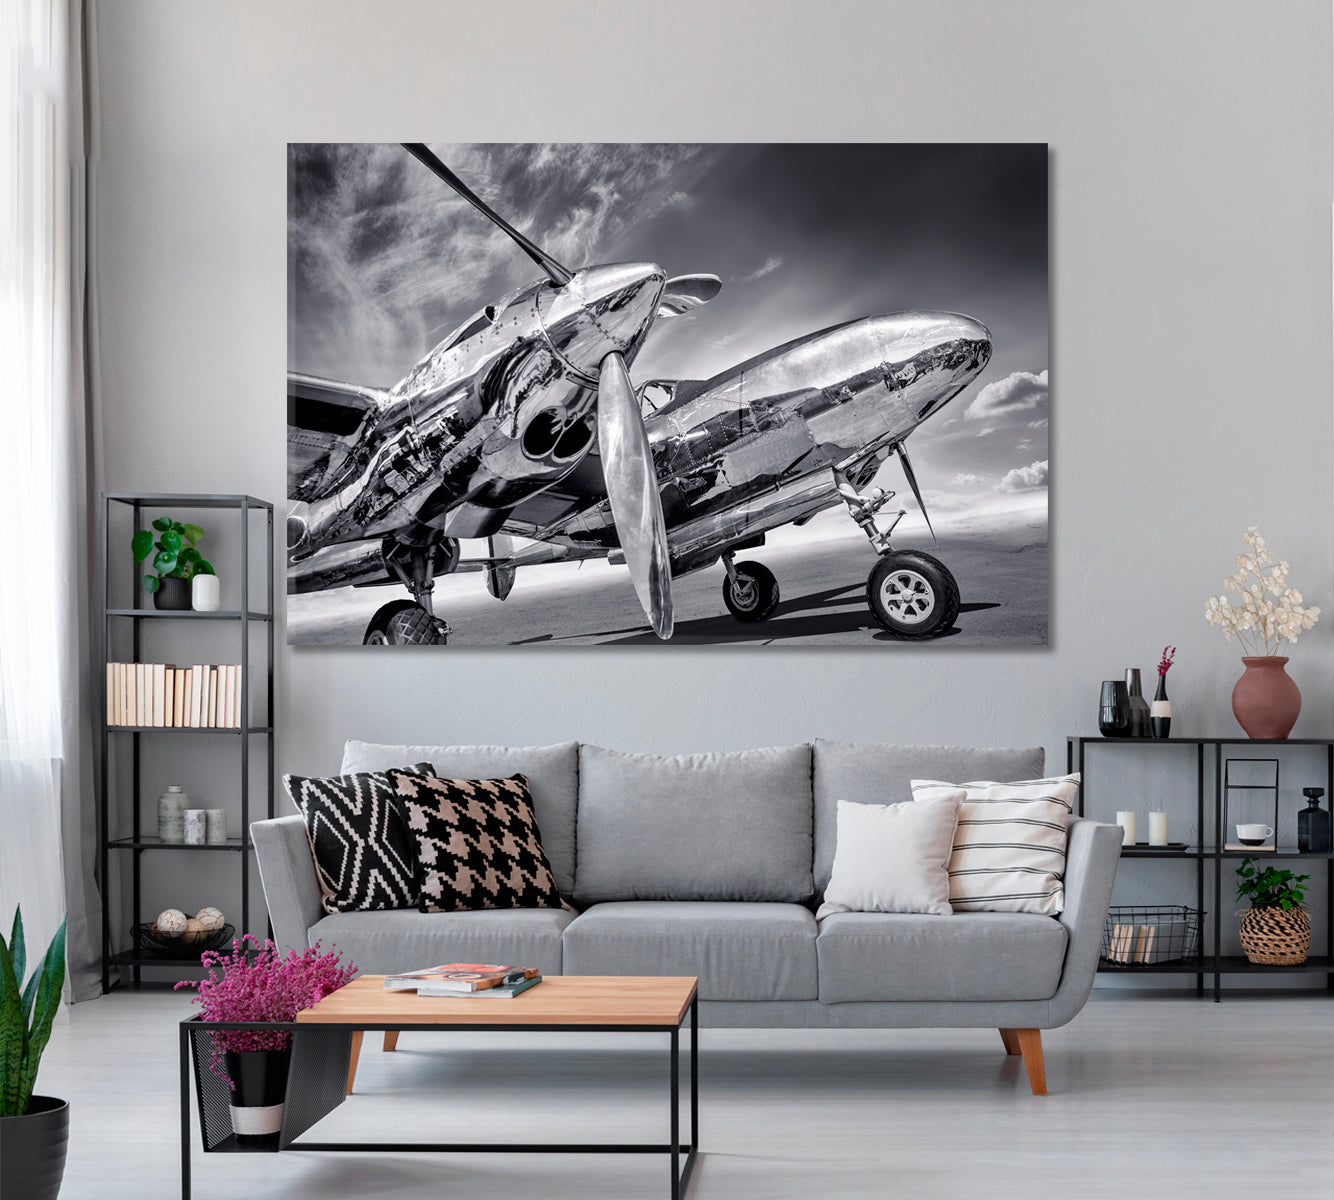 Sports Plane on Runway Canvas Print ArtLexy 1 Panel 24"x16" inches 